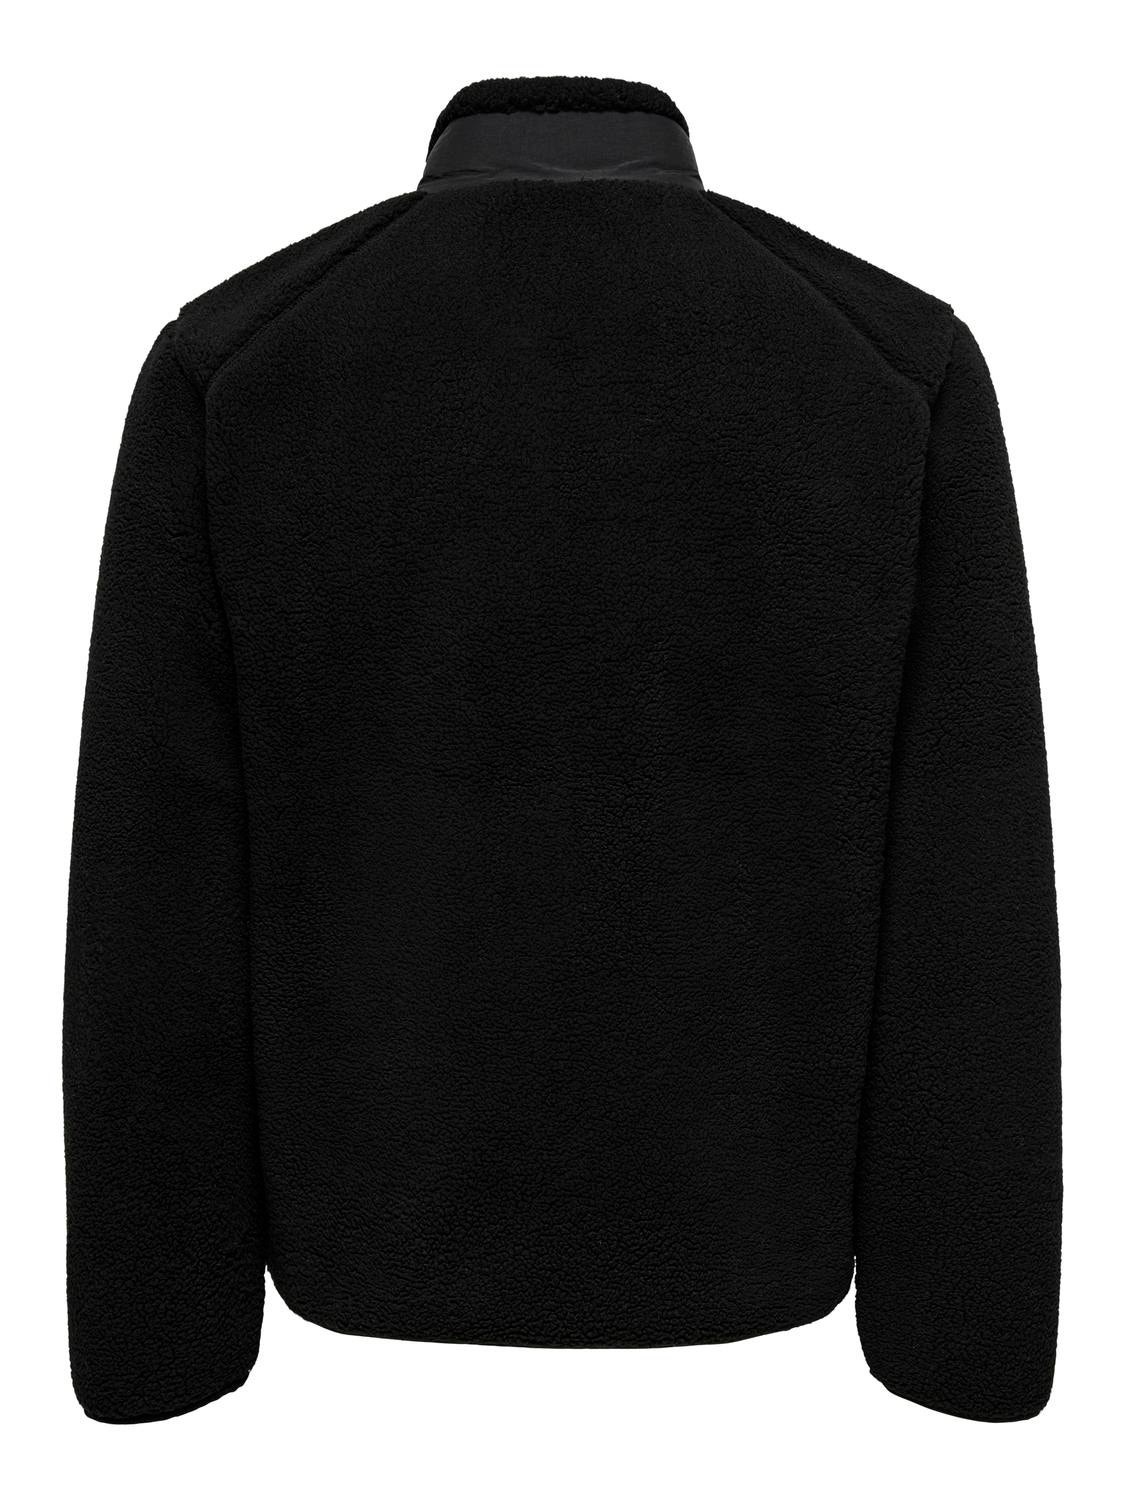 high-neck teddy jacket | Black | ONLY & SONS®